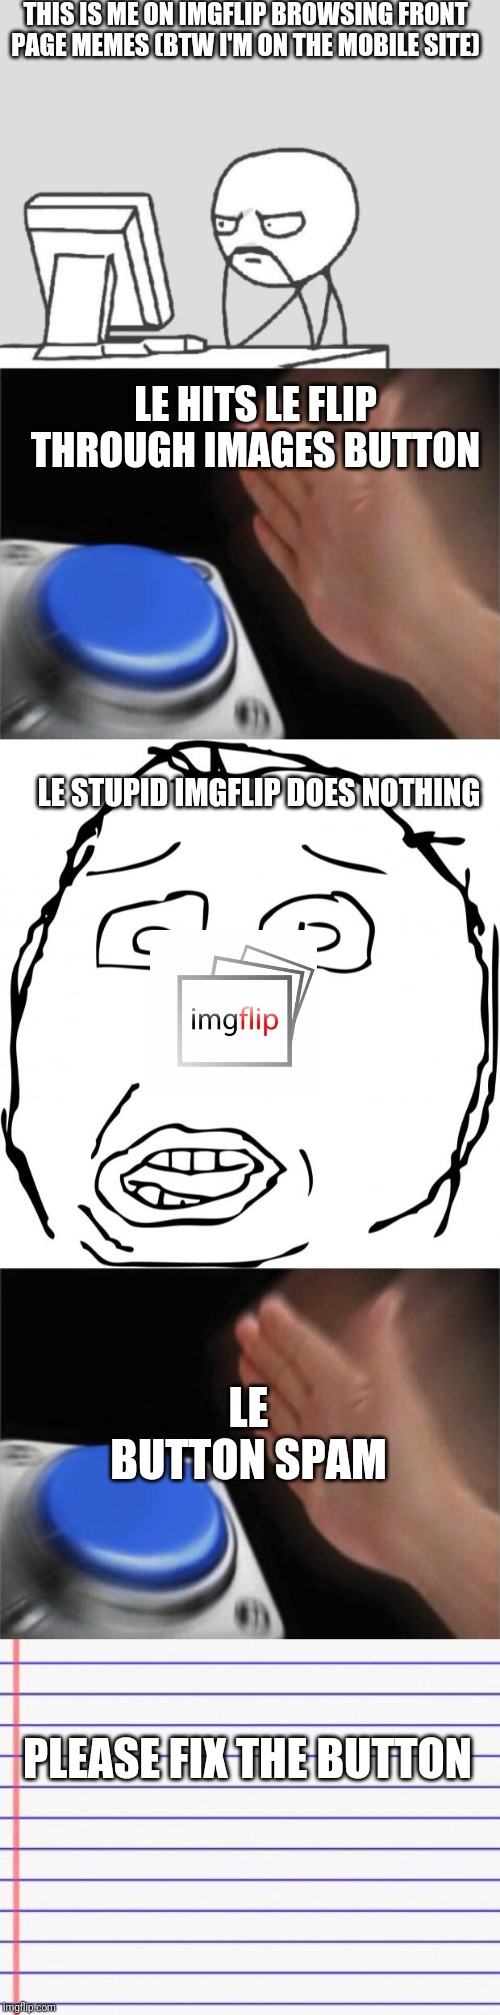 THIS IS ME ON IMGFLIP BROWSING FRONT PAGE MEMES (BTW I'M ON THE MOBILE SITE); LE HITS LE FLIP THROUGH IMAGES BUTTON; LE STUPID IMGFLIP DOES NOTHING; LE BUTTON SPAM; PLEASE FIX THE BUTTON | image tagged in memes,computer guy,herp,honest letter,blank nut button | made w/ Imgflip meme maker